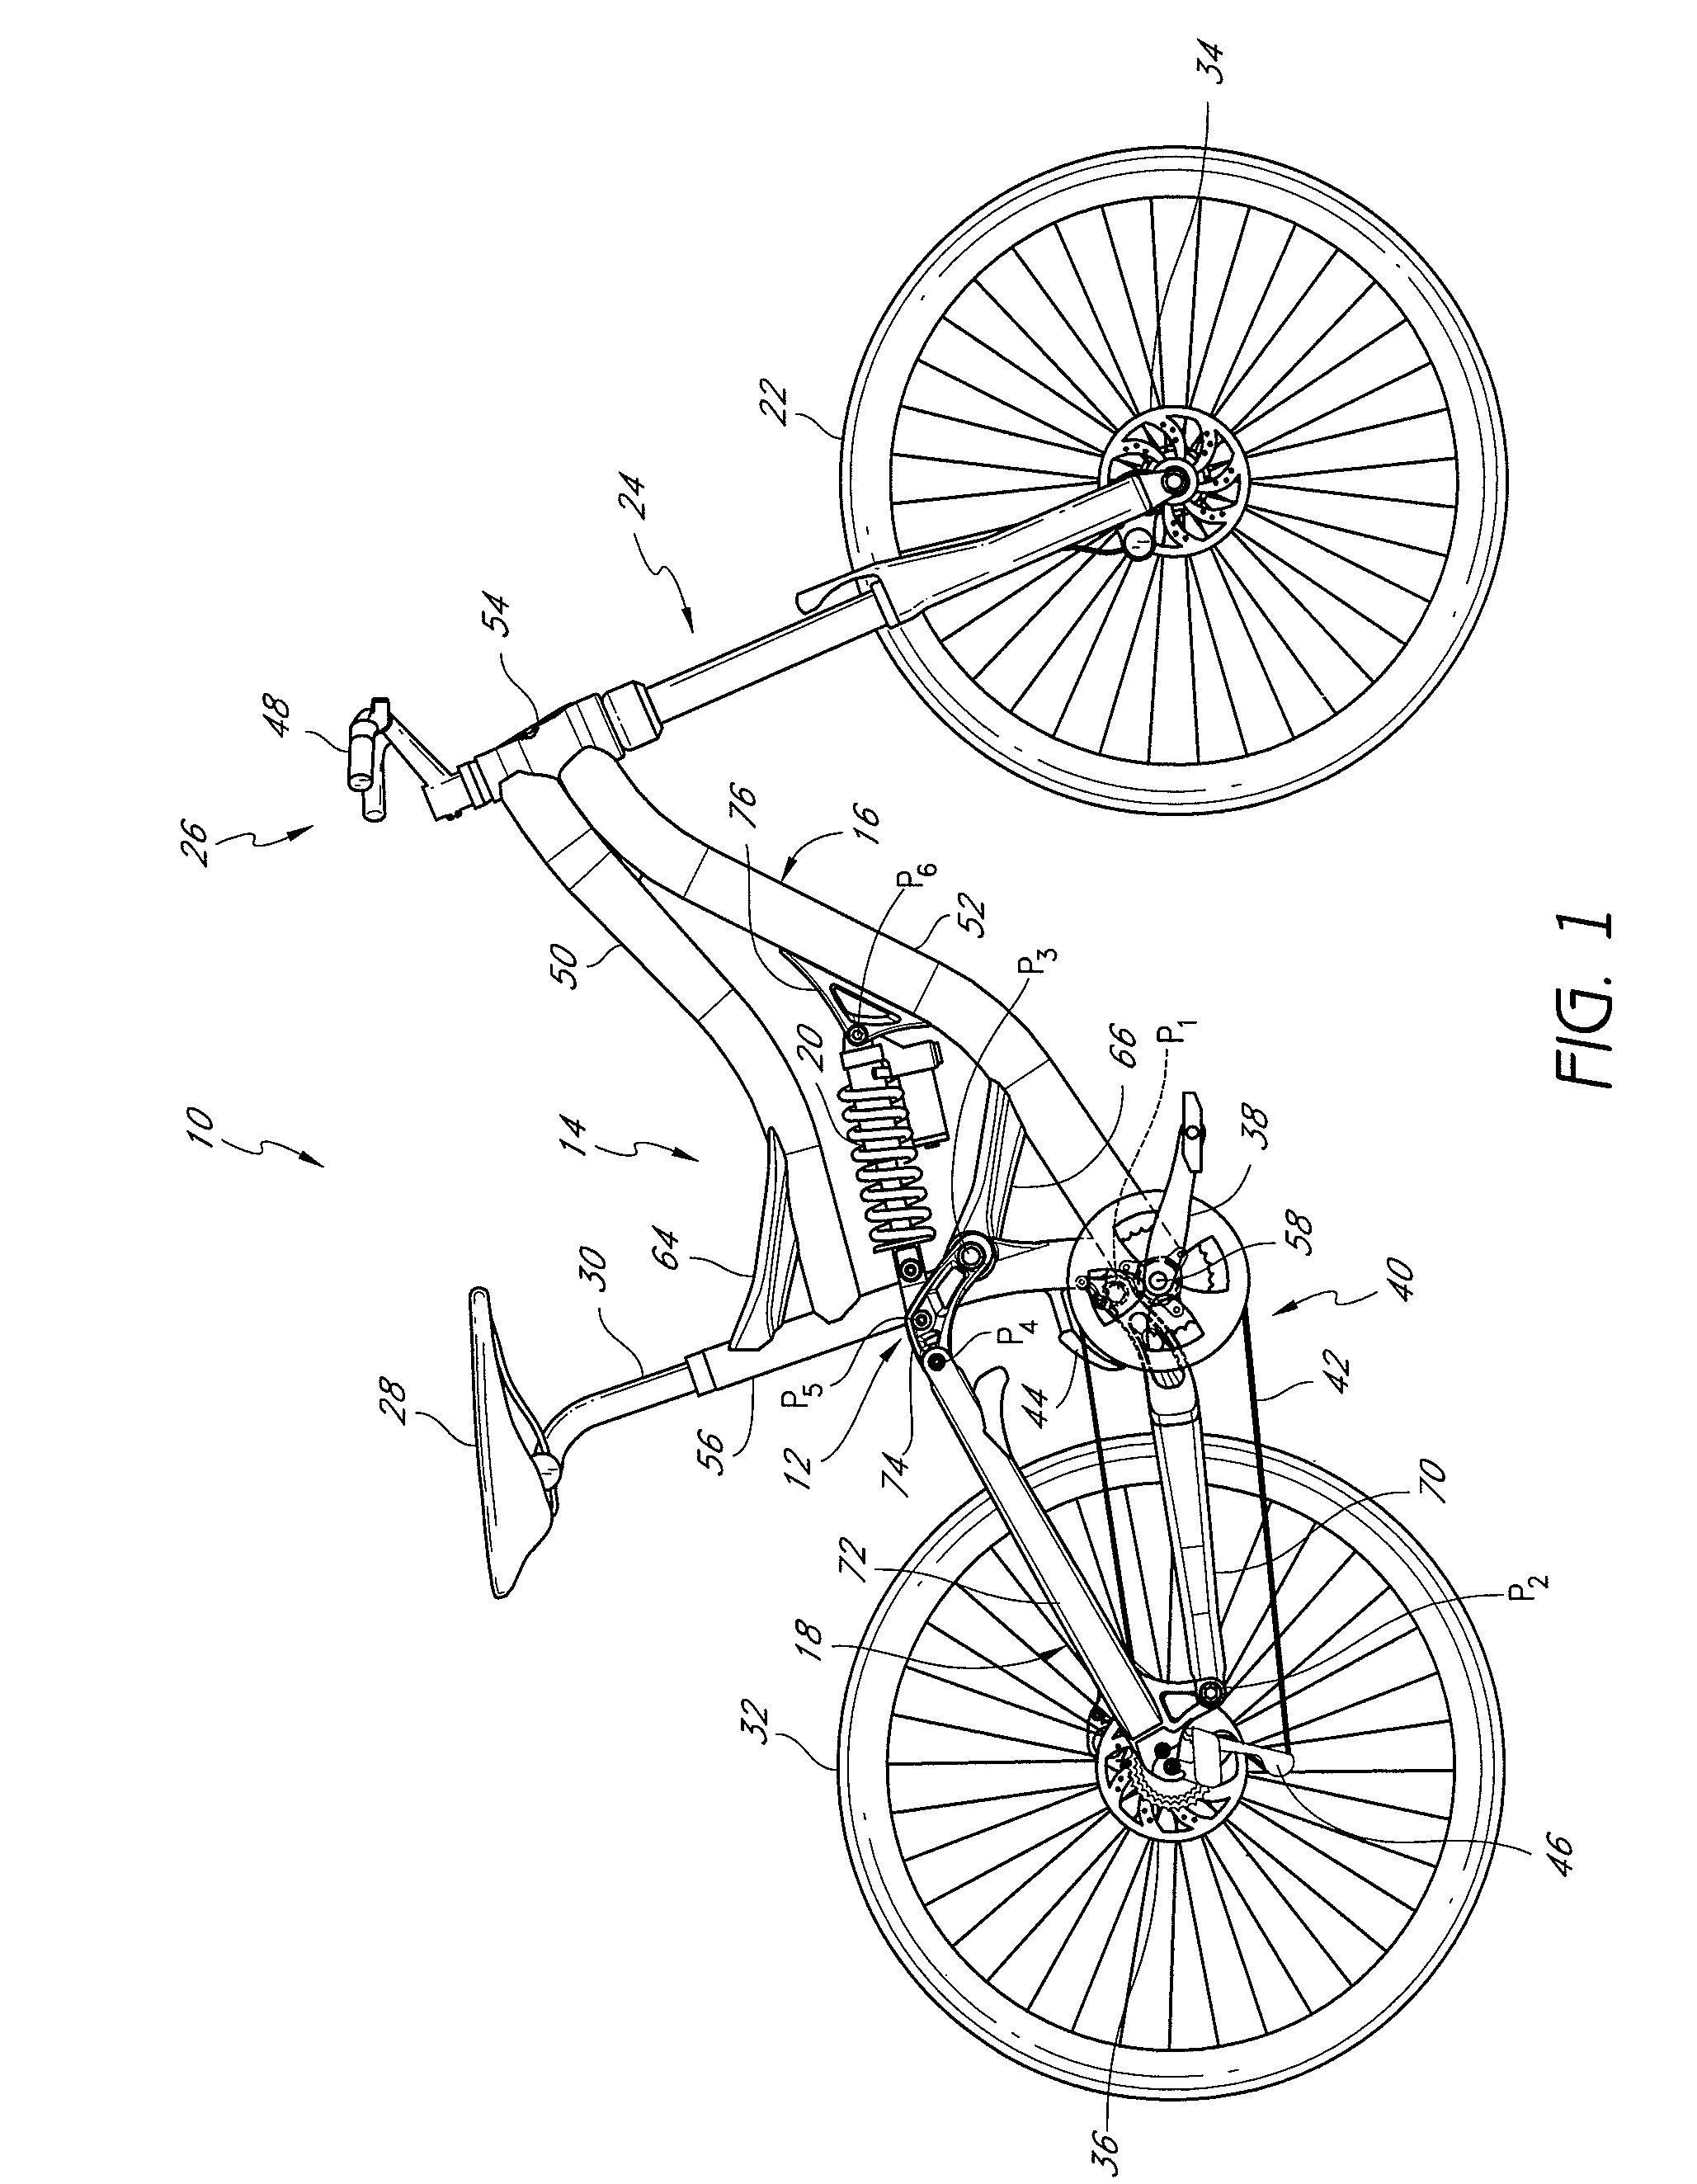 Bicycle frame with articulating linkage mounting arrangement